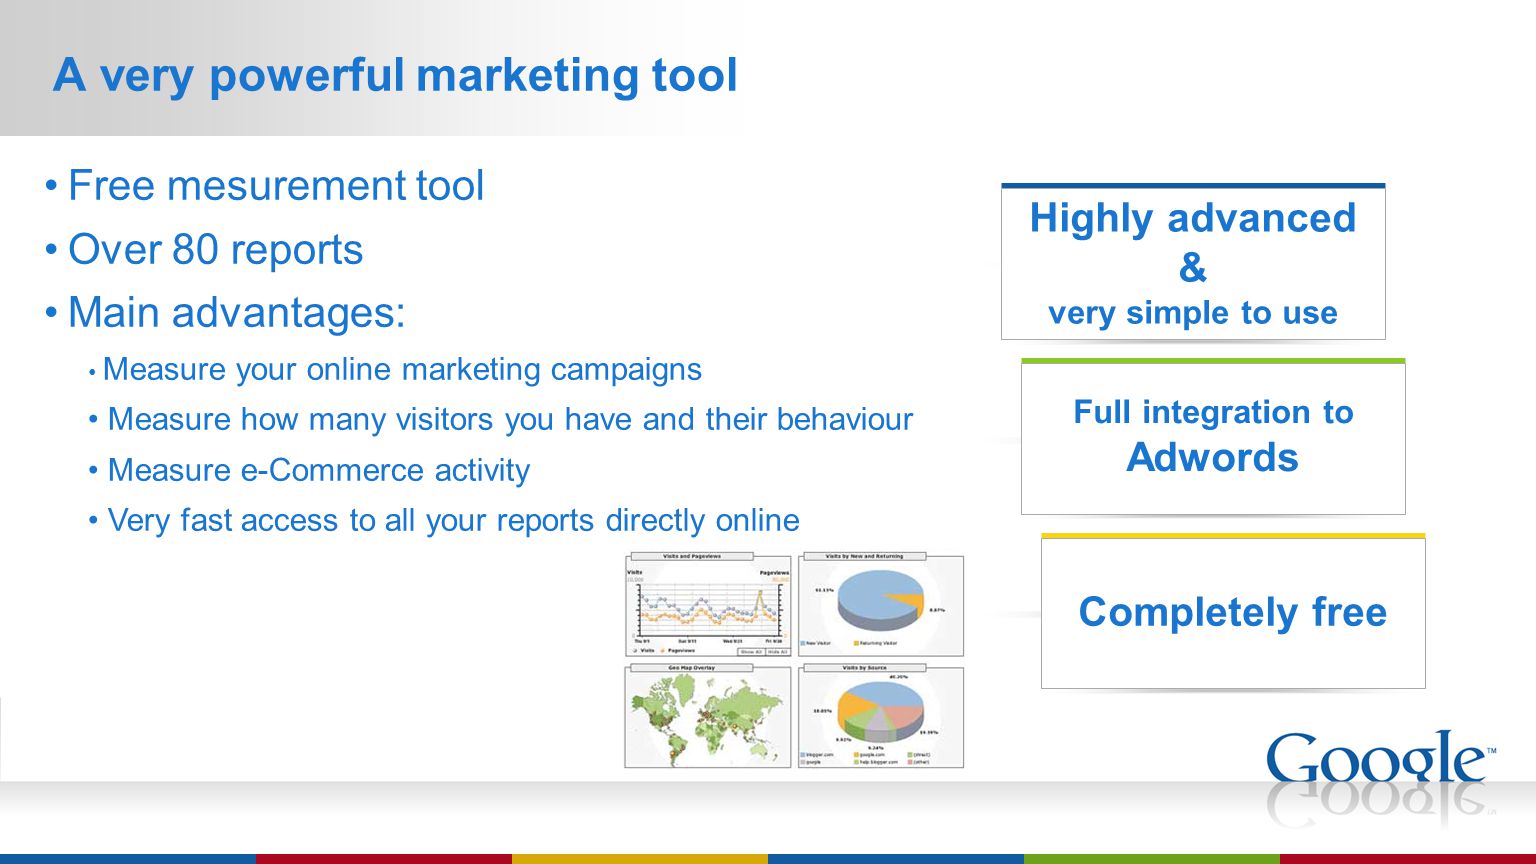 A very powerful marketing tool Highly advanced & very simple to use Full integration to Adwords Completely free Free mesurement tool Over 80 reports Main advantages: Measure your online marketing campaigns Measure how many visitors you have and their behaviour Measure e-Commerce activity Very fast access to all your reports directly online